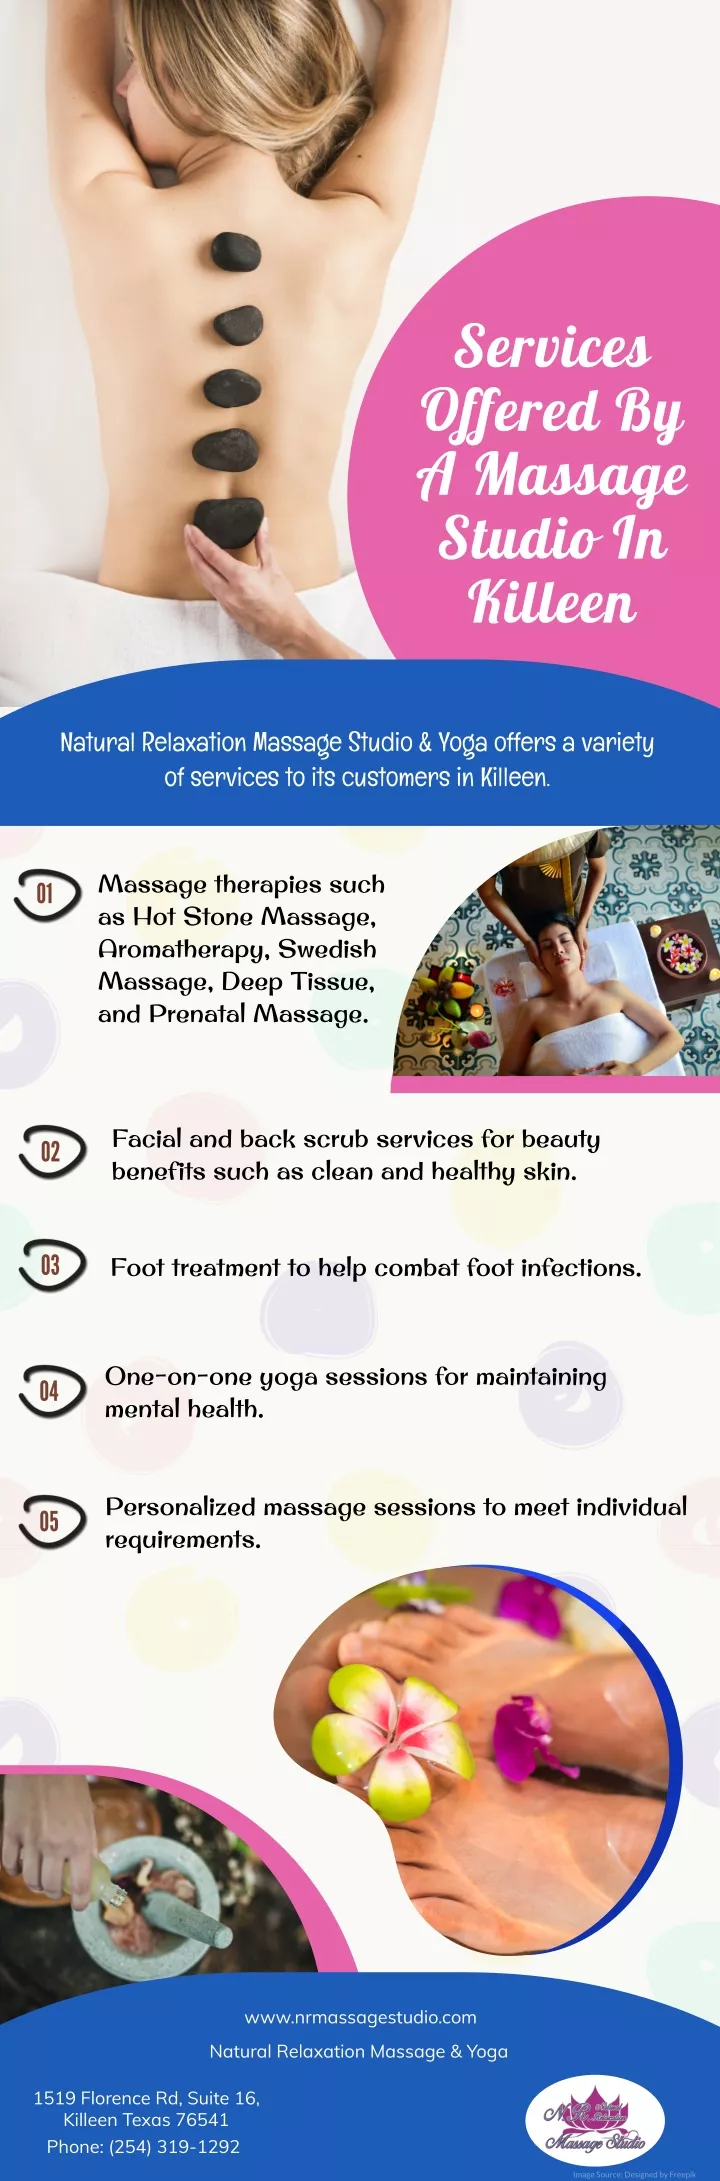 services offered by a massage studio in killeen